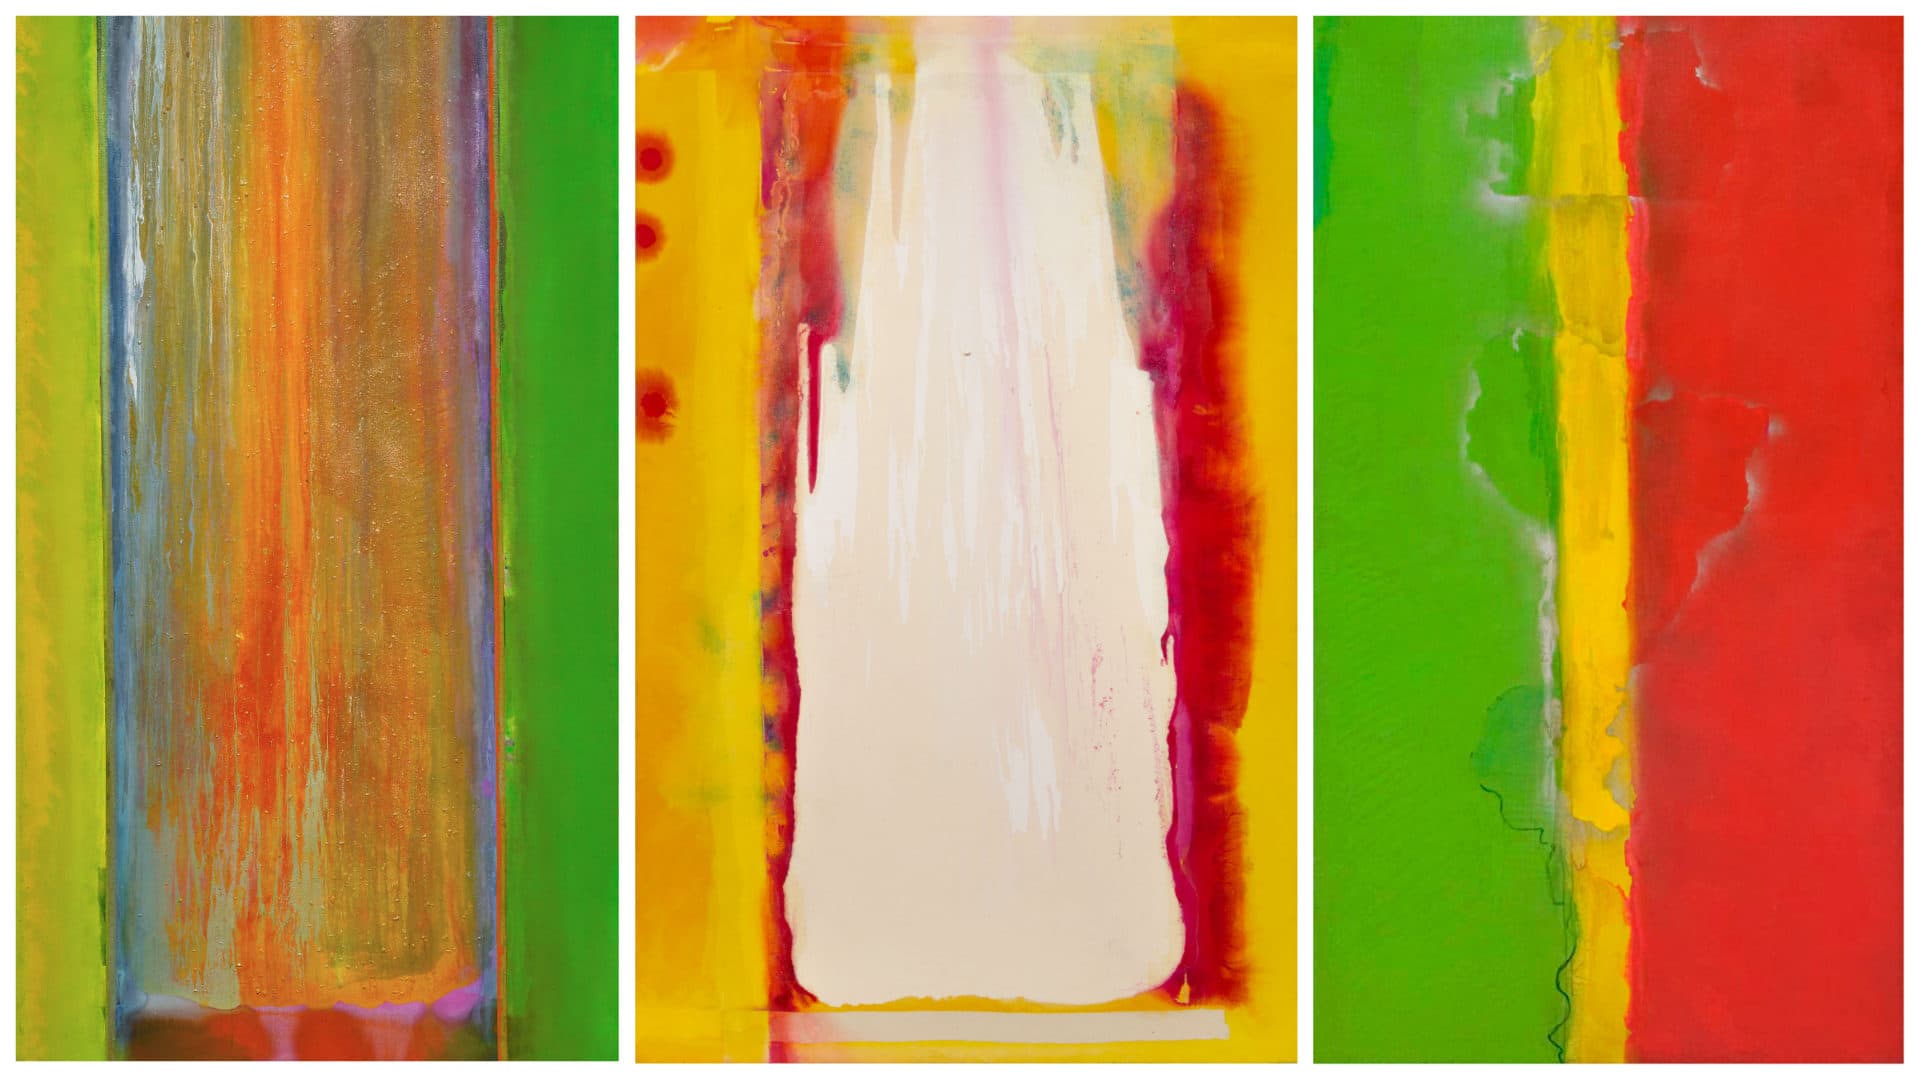 Left to right: Frank Bowling's &quot;Suncrush,&quot; 1976 (Courtesy Sophie M. Friedman Fund; Frank Bowling; DACS, London &amp; ARS, New York 2022; Museum of Fine Arts, Boston); &quot;Woosh,&quot; 1974 (Courtesy Jaime Alvarez; Frank Bowling; DACS, London &amp; ARS, New York 2022; Museum of Fine Arts, Boston); and &quot;Who's Afraid of Barney Newman,&quot; 1968 (Courtesy Tate: Presented by Rachel Scott 2006; Frank Bowling; DACS/Artimage, London &amp; ARS, New York 2022; Museum of Fine Arts, Boston).